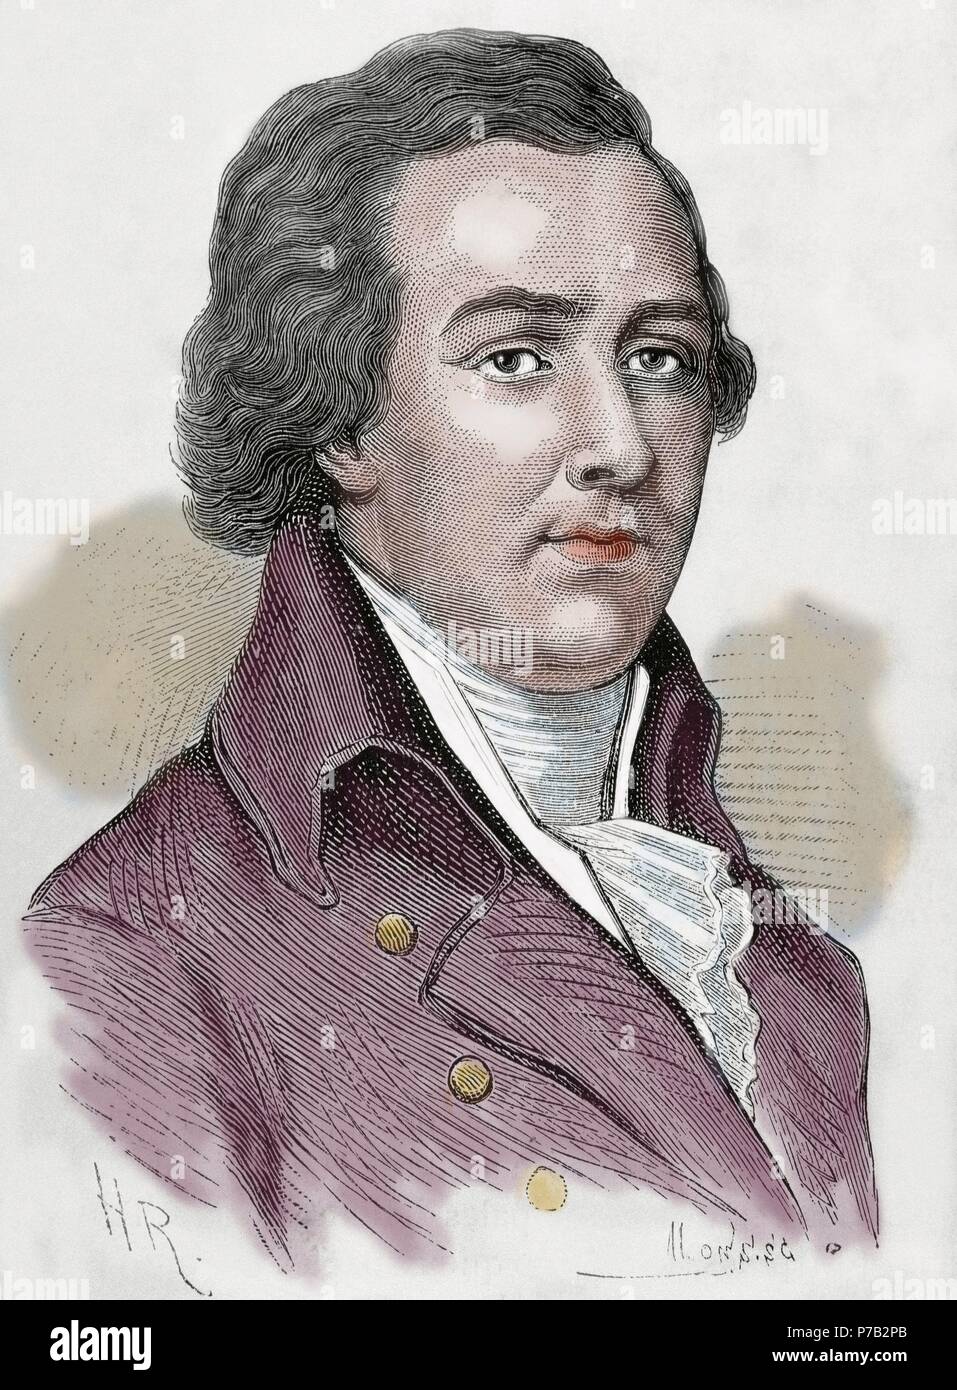 William Pitt, 1st Earl of Chatham (1708-1778). British statesman of the Whig group. Engraving. Portrait. Colored. Stock Photo